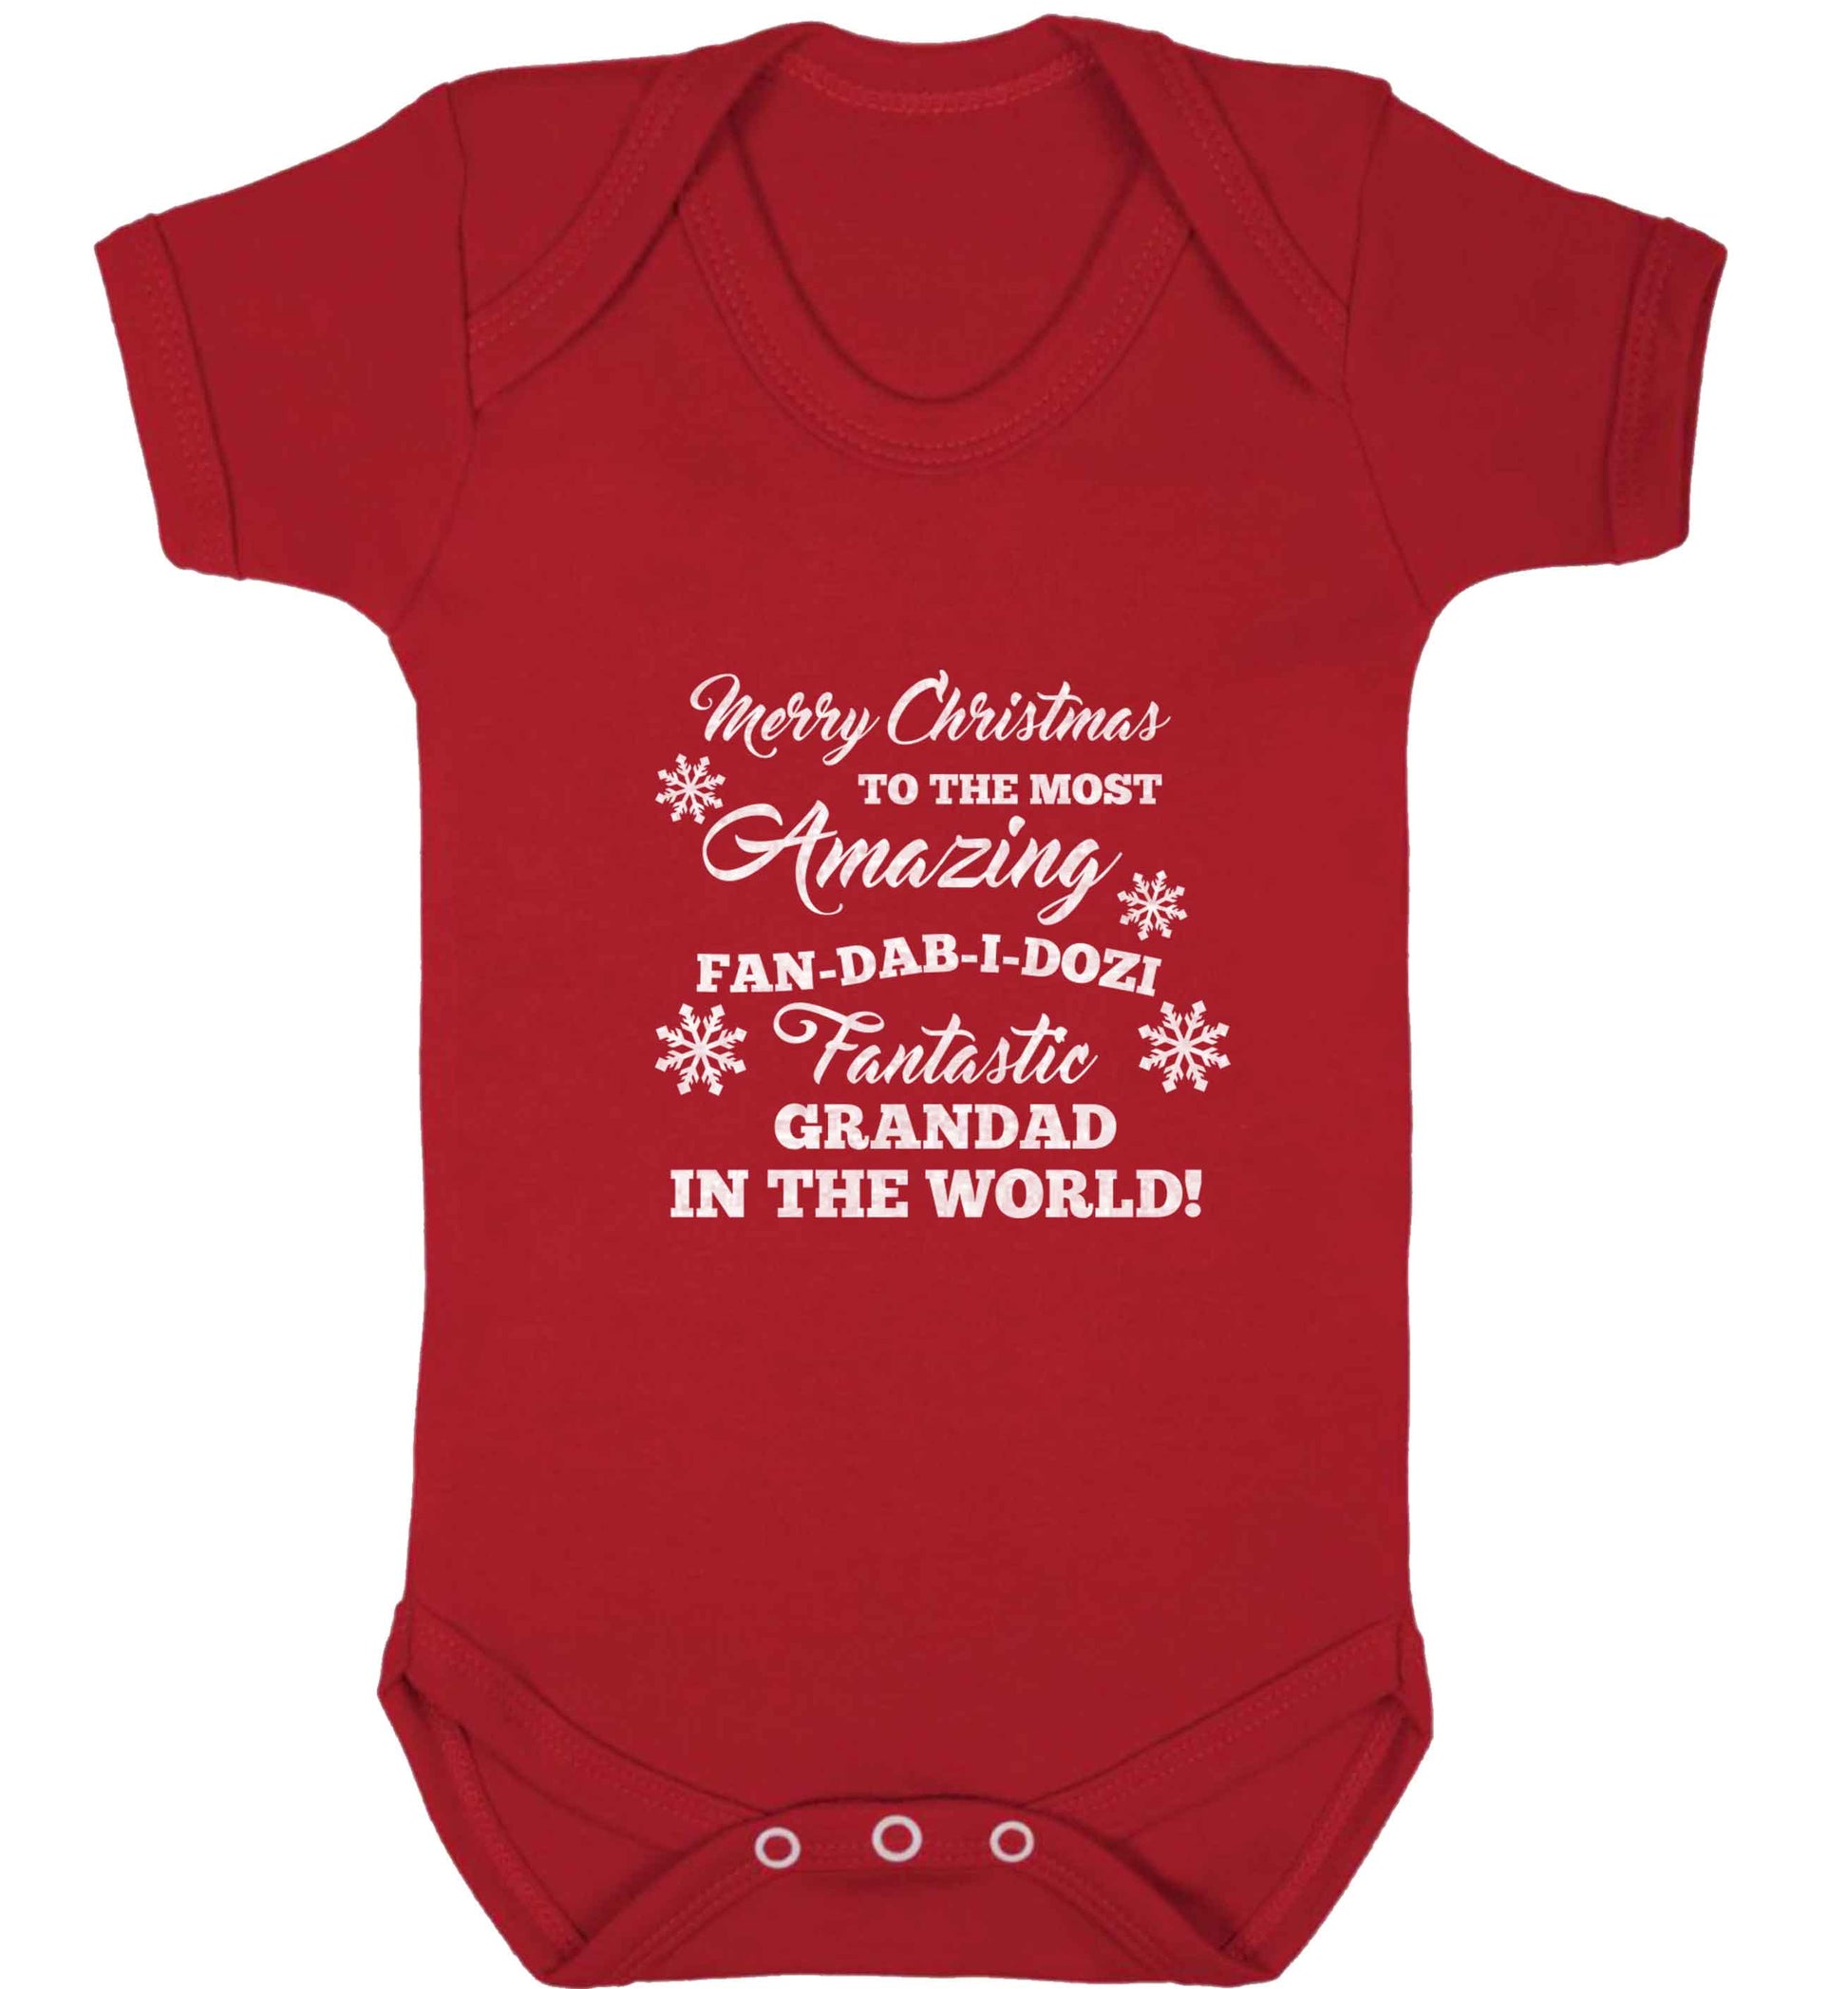 Merry Christmas to the most amazing fan-dab-i-dozi fantasic Grandad in the world baby vest red 18-24 months